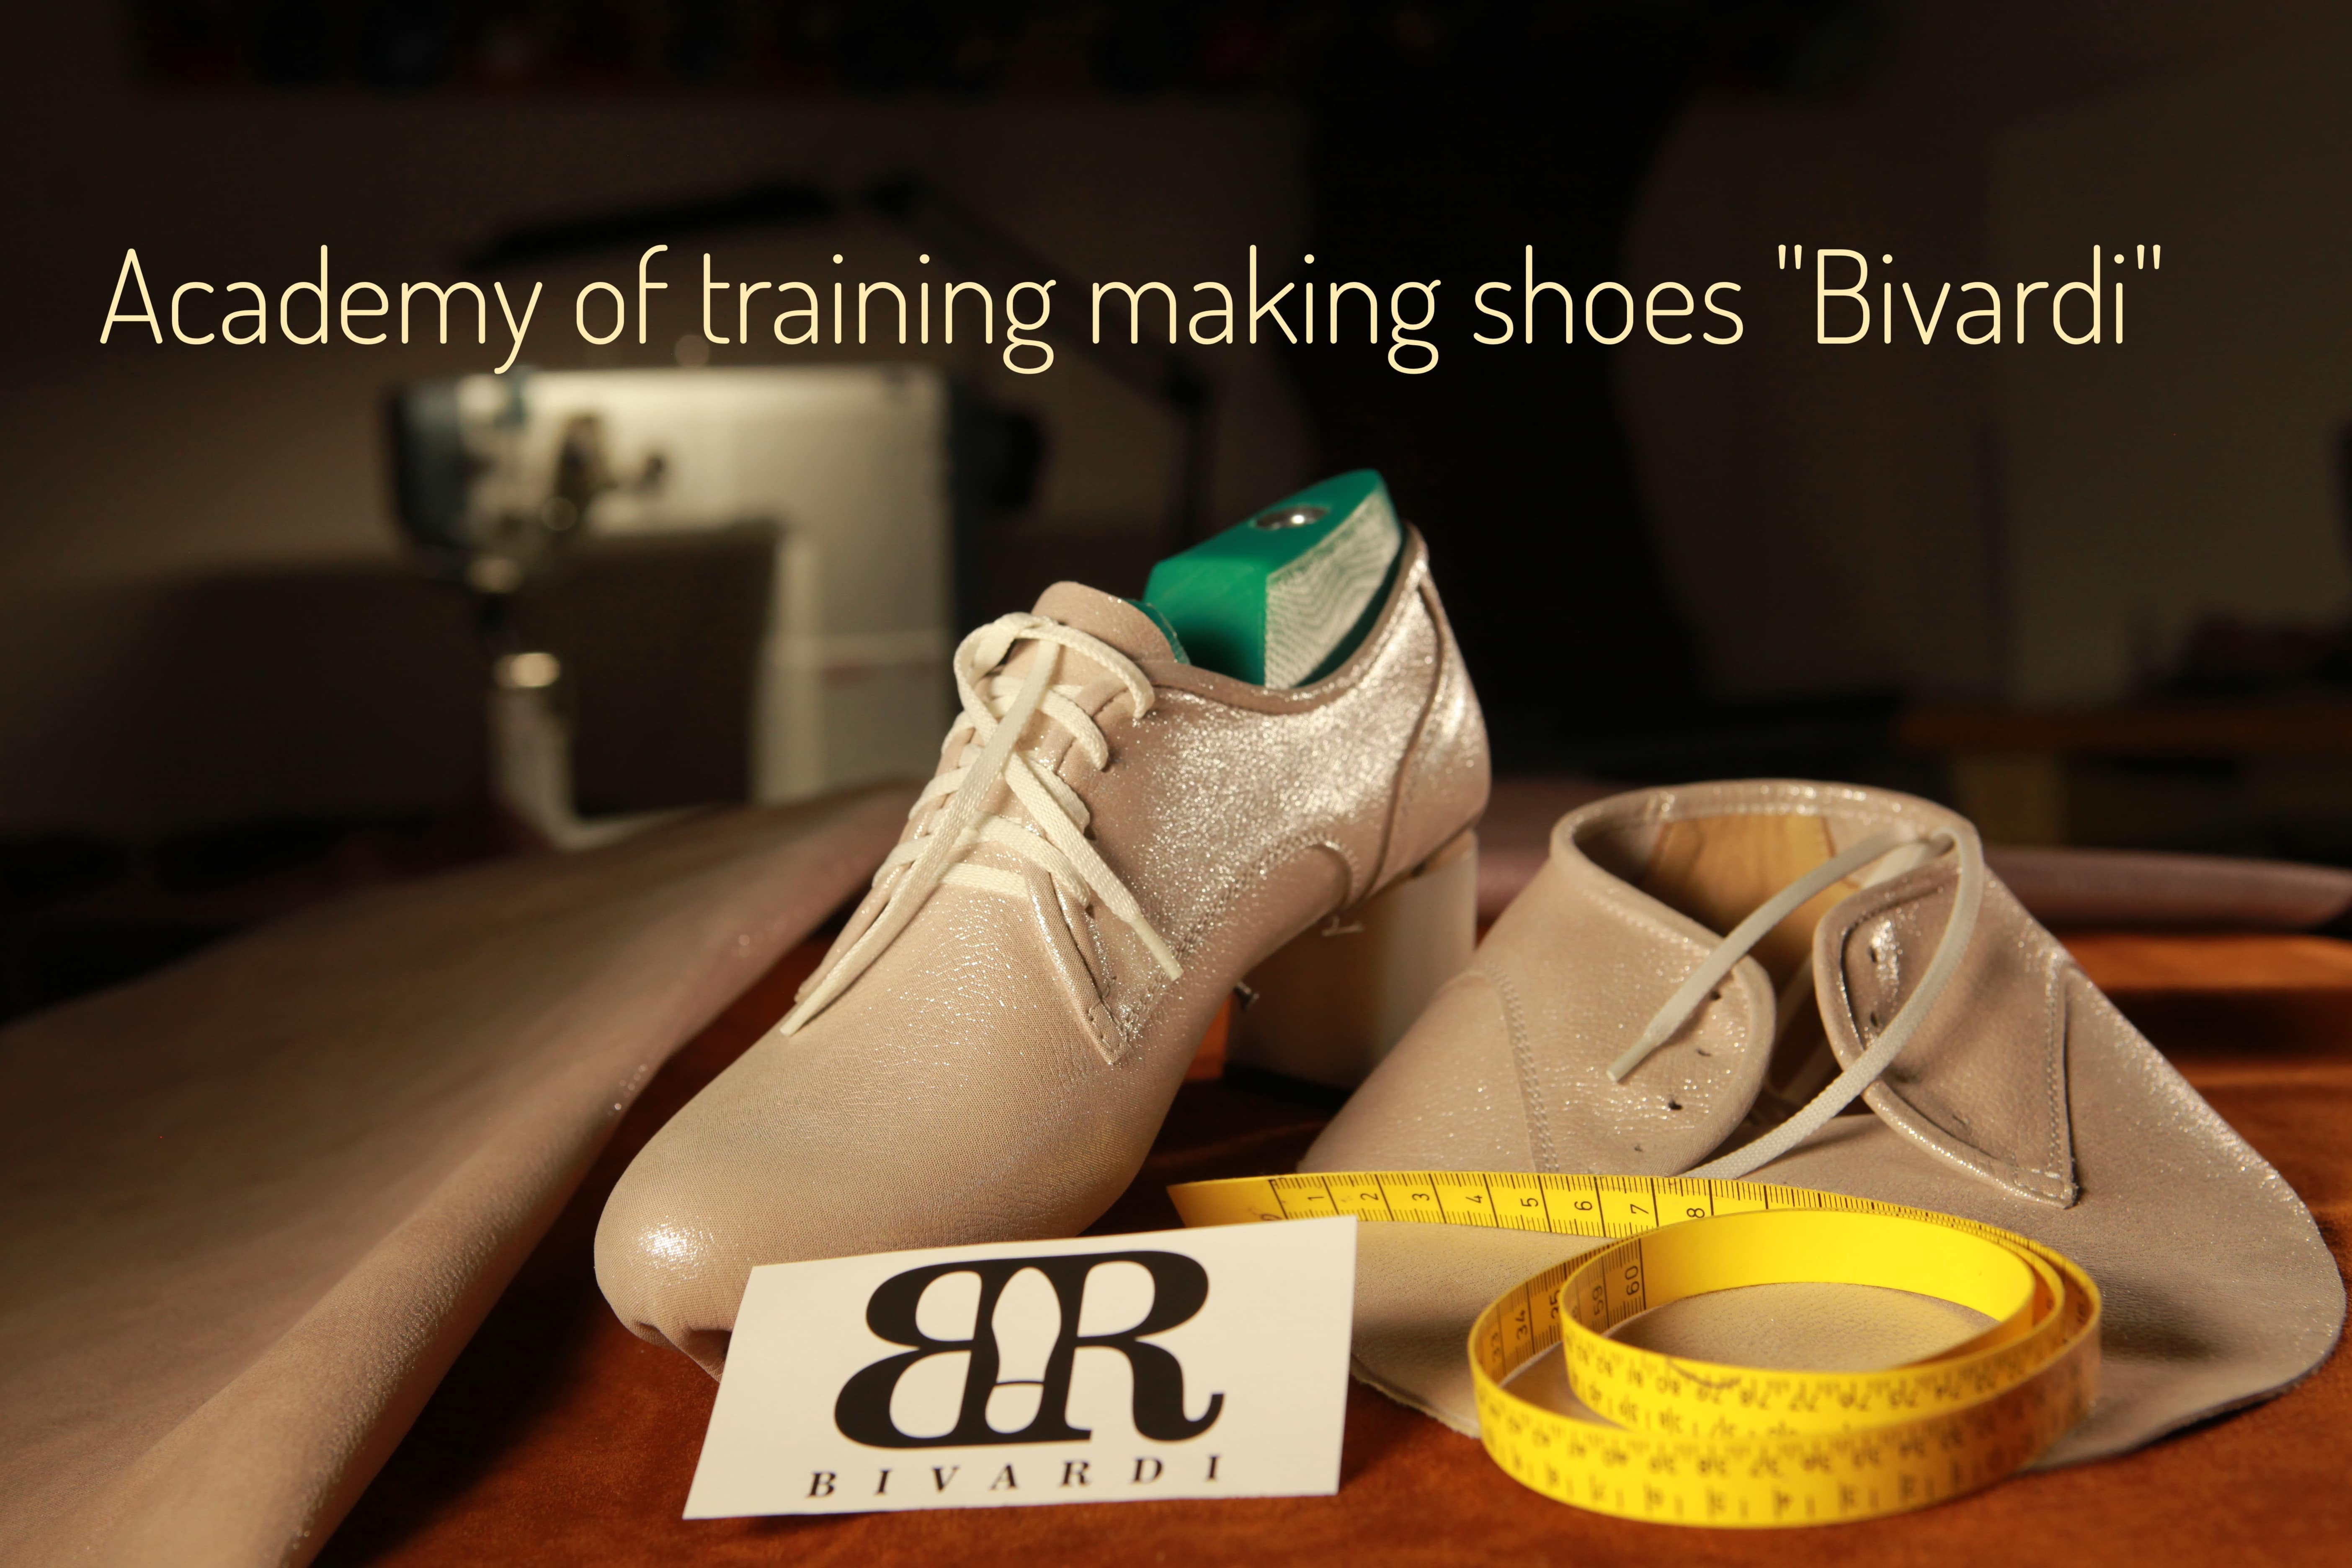 School of shoes making “Bivardi” - an unprecedented educational institution for adults!